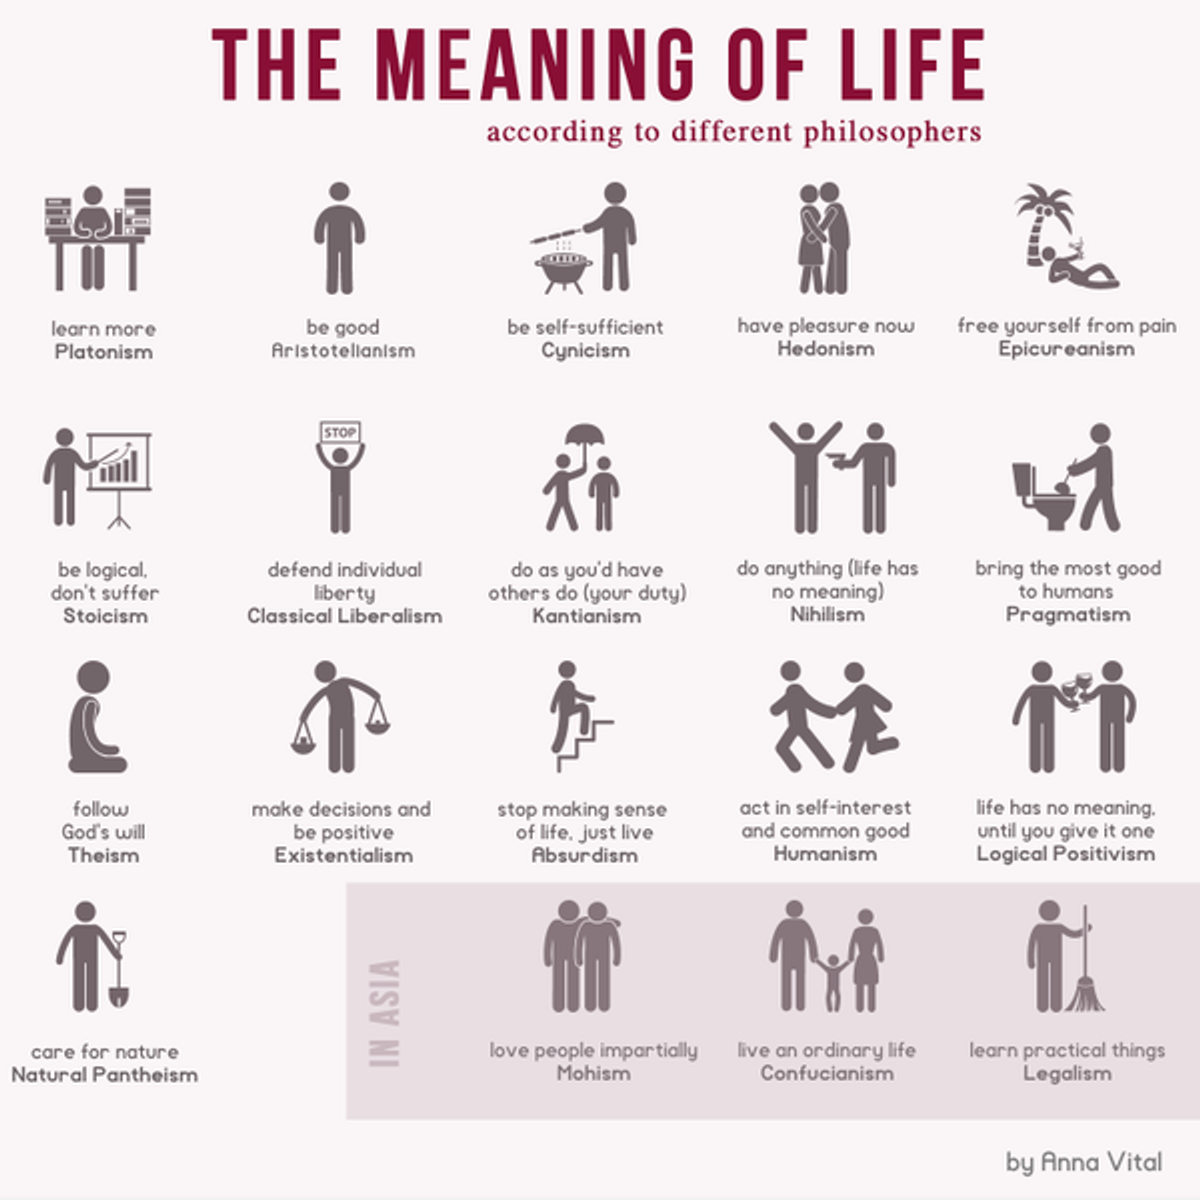 11 Different Views on the Meaning of Life